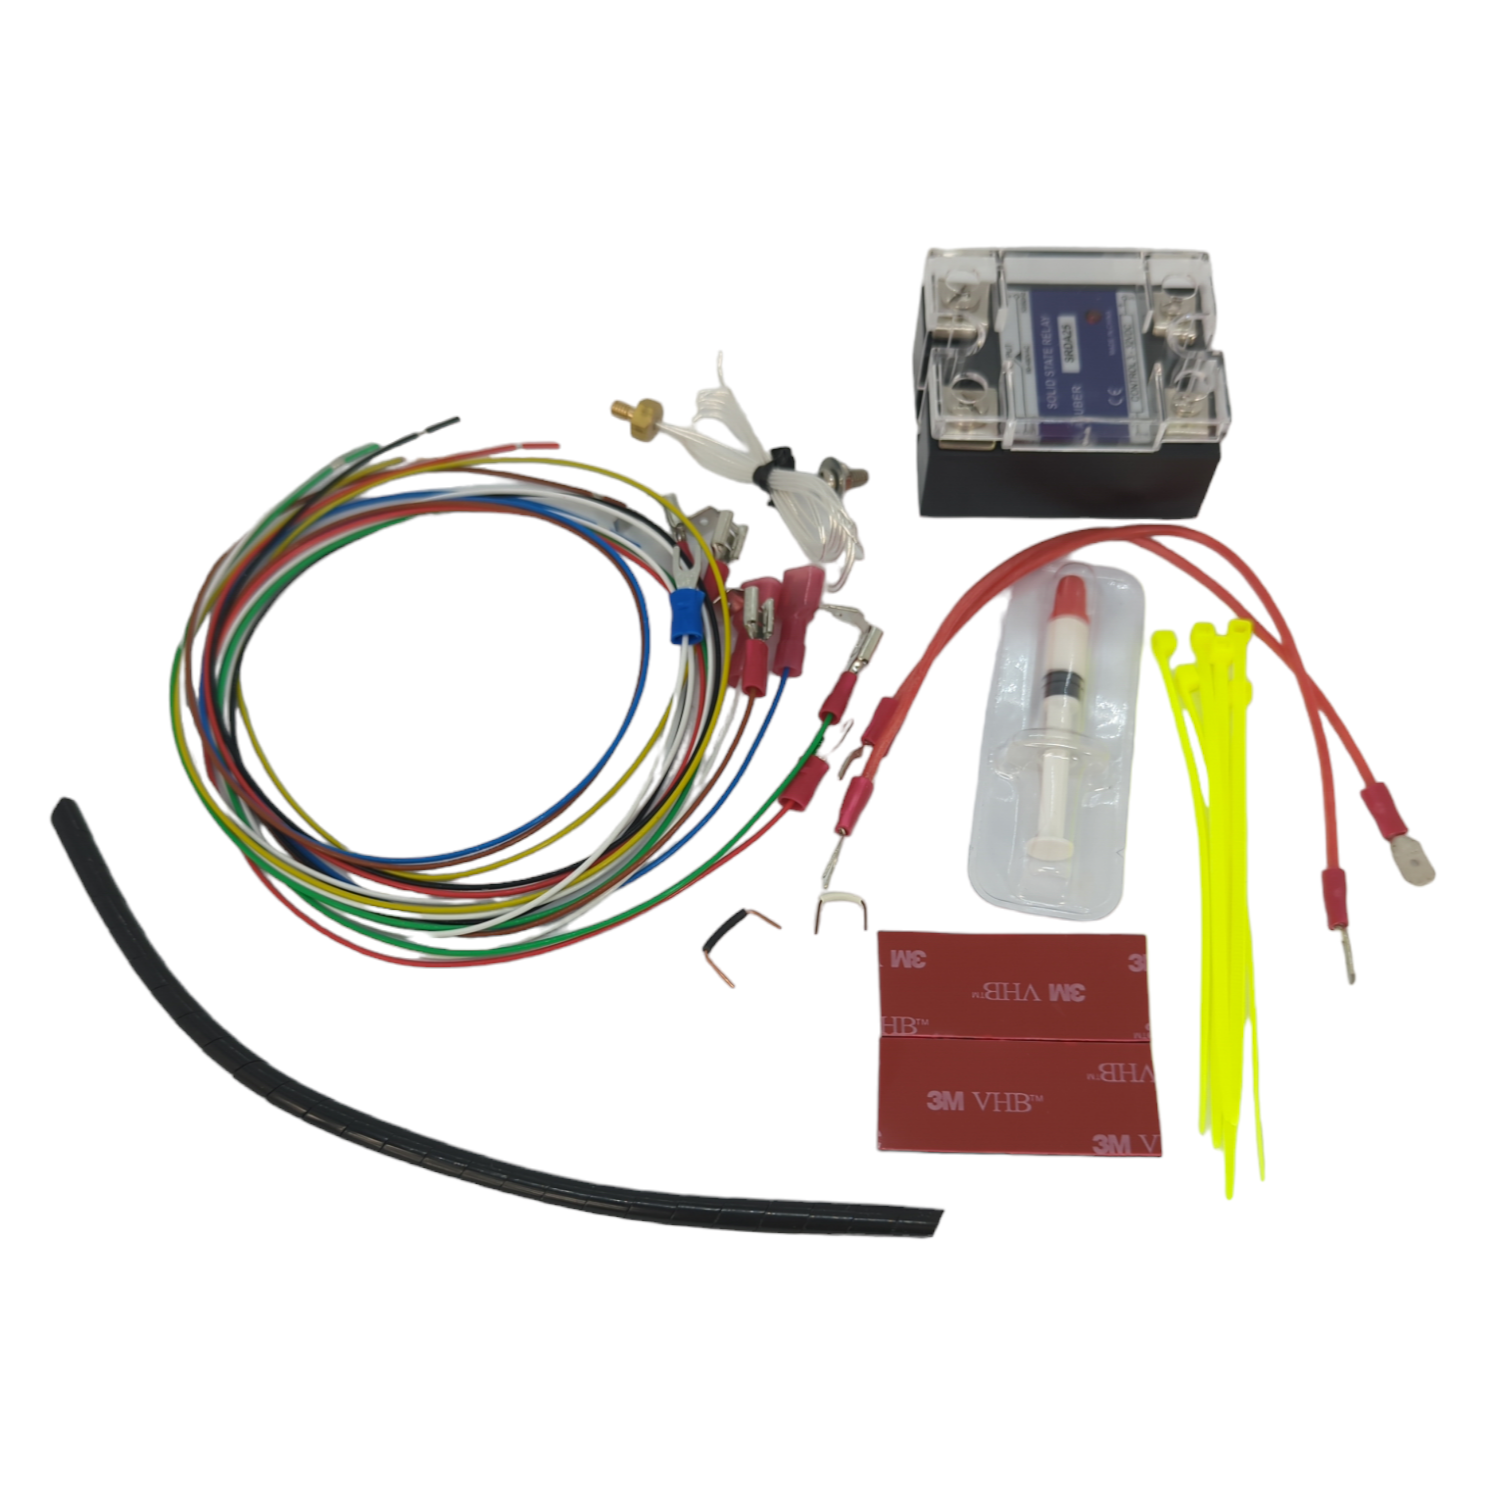 PID KIT for Gaggia Classic Pro & Classic & Home w/ pre-infusion [KIT-GGP] -  $199.50 : Auber Instruments, Inc., Temperature control solutions for home  and industry